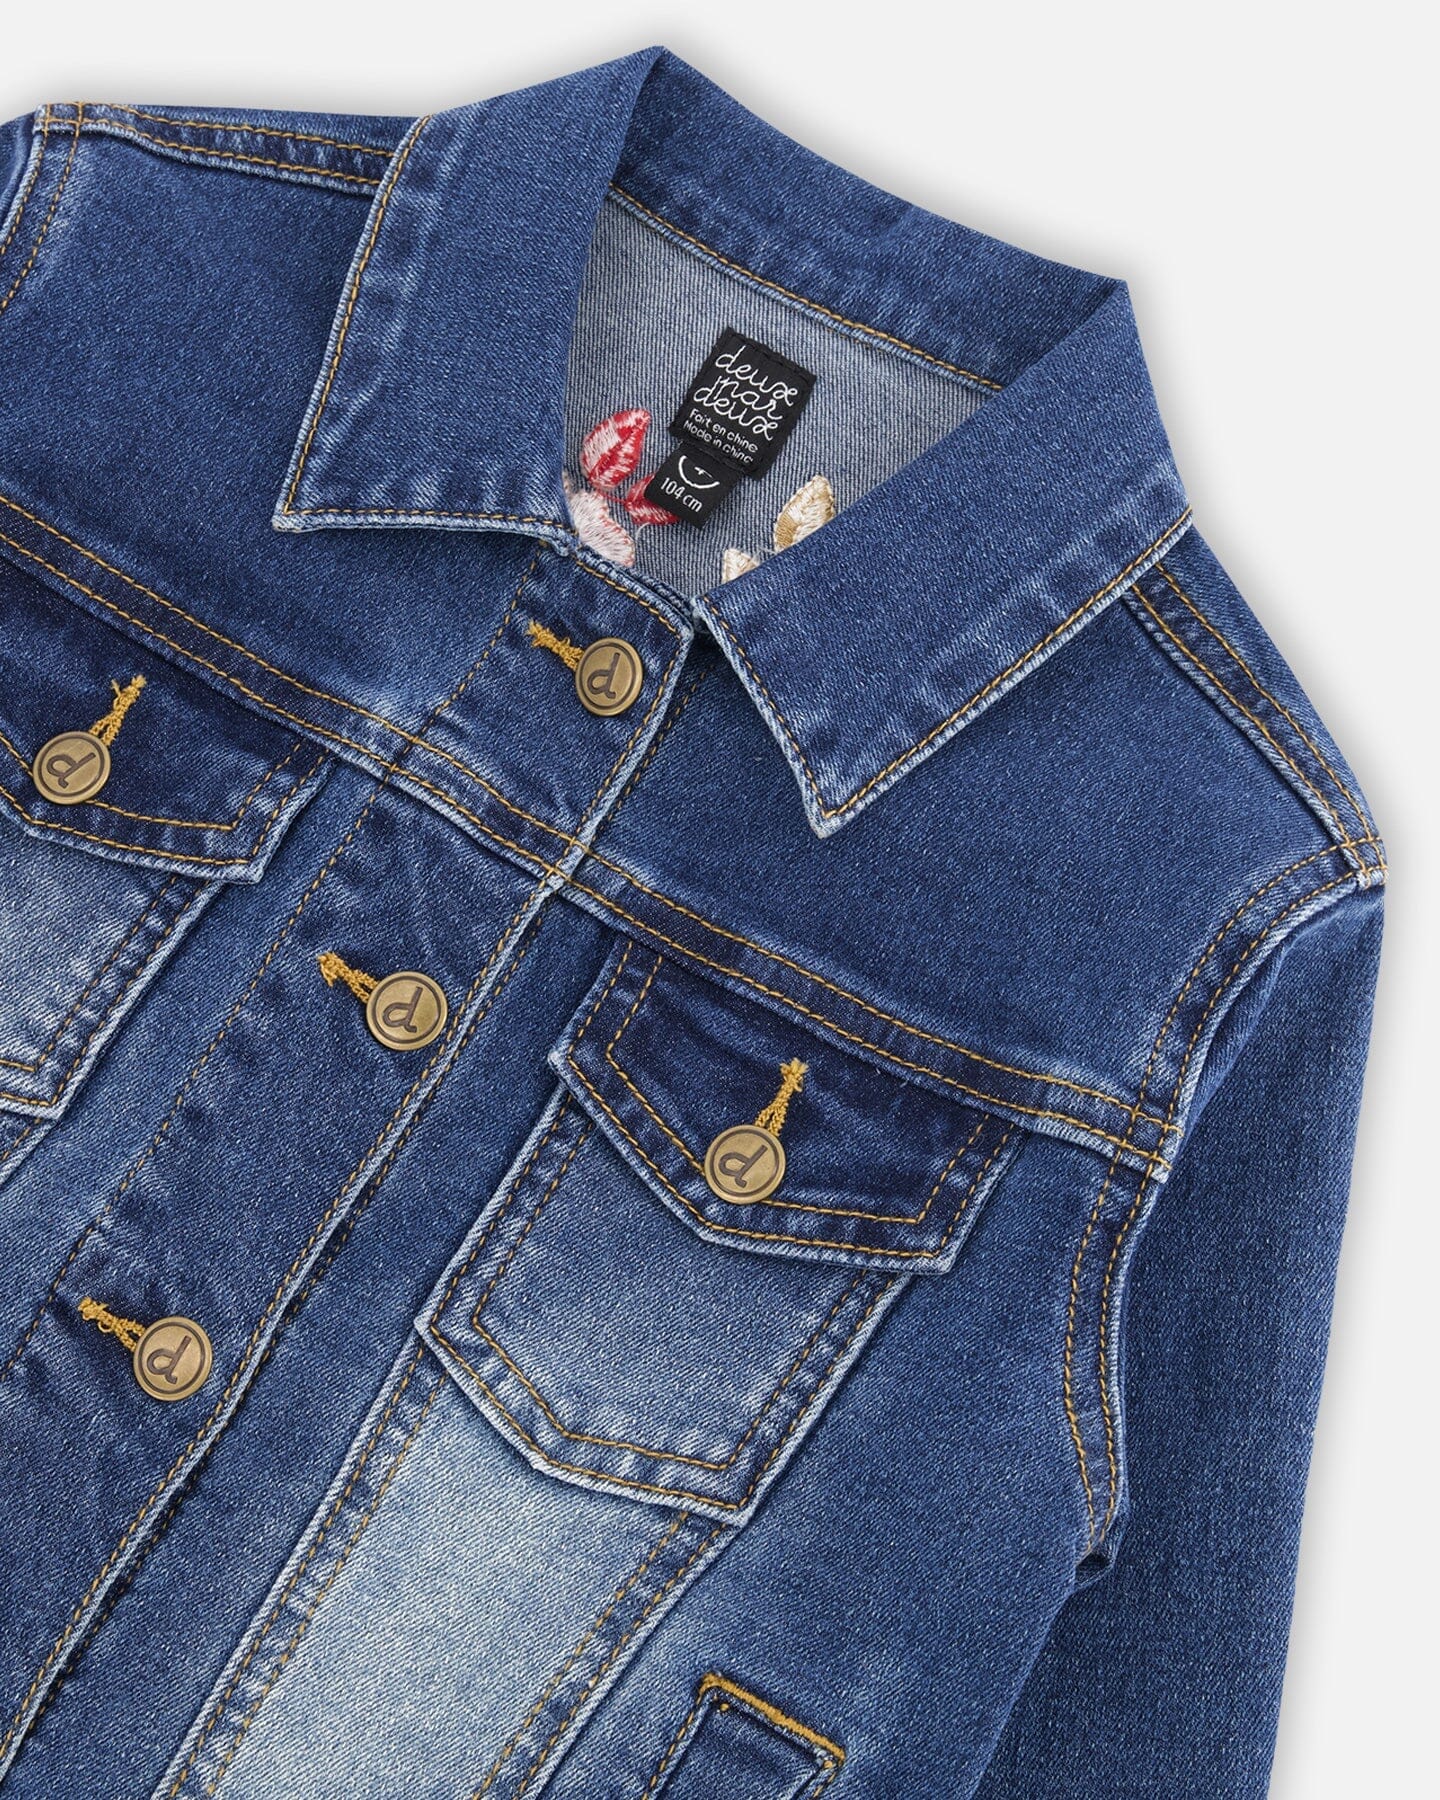 Denim Jacket With Embroidery - F20H50_123